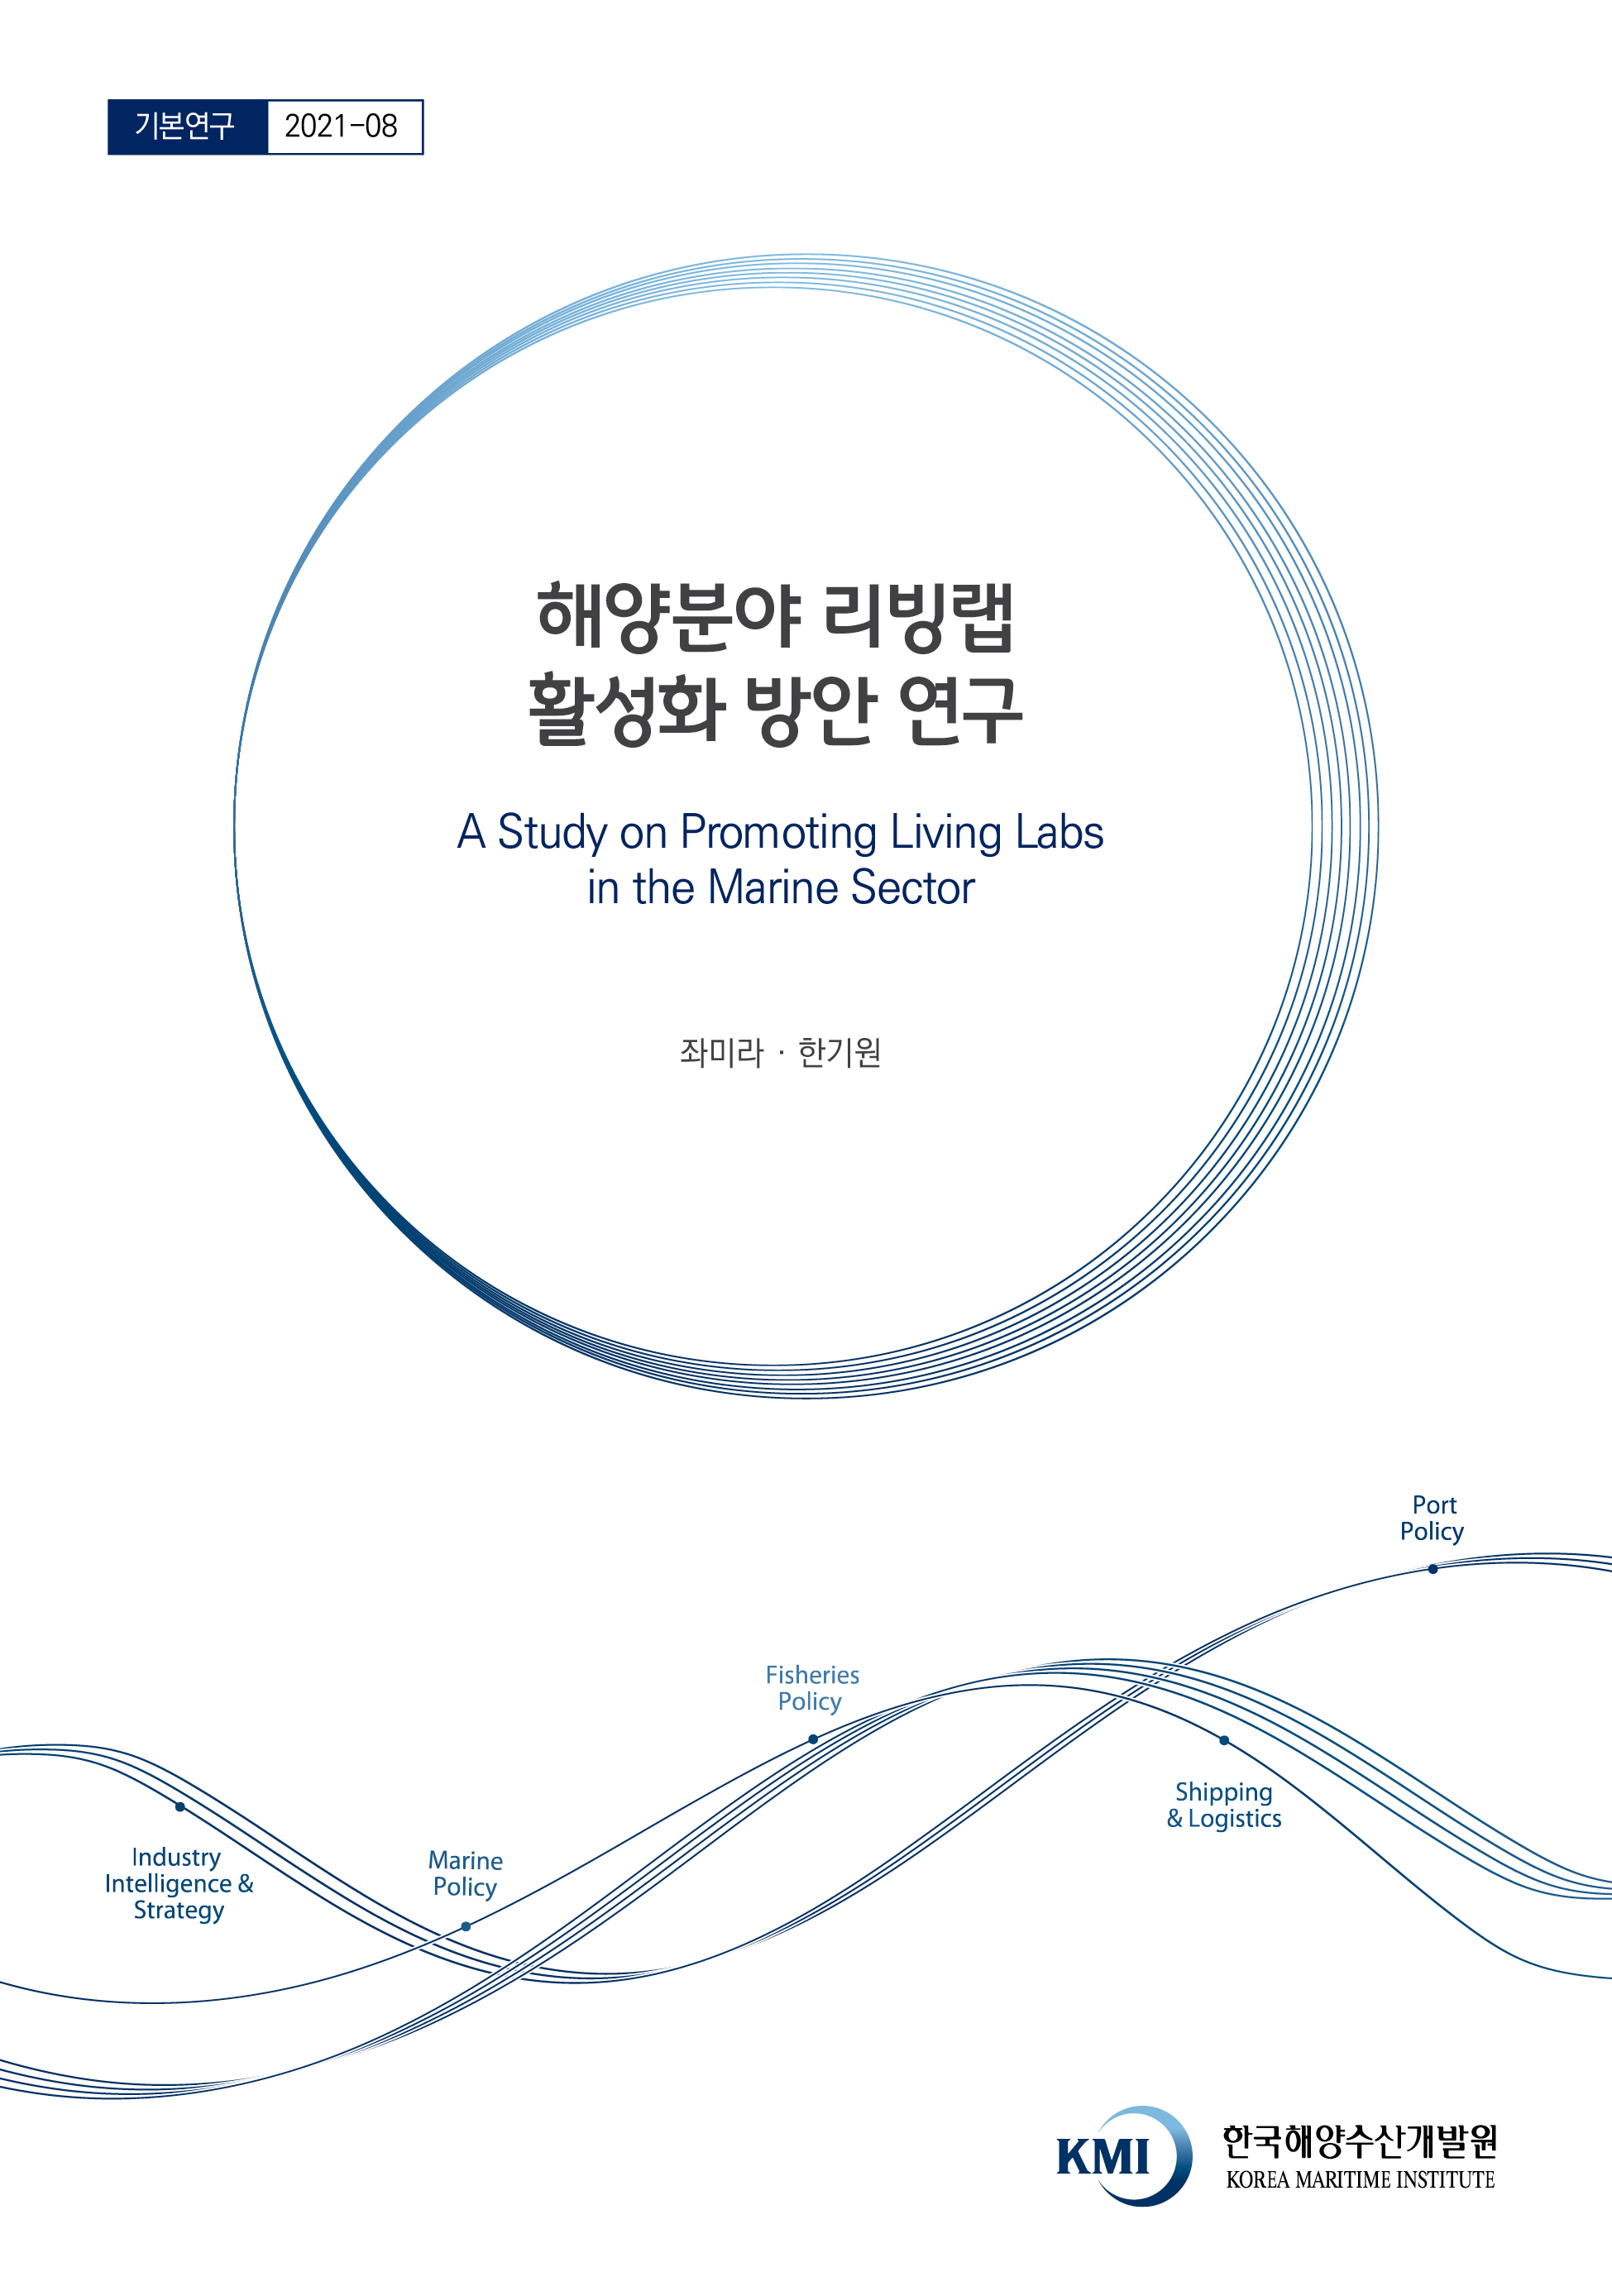 A Study on Promoting Living Labs in the Marine Sector